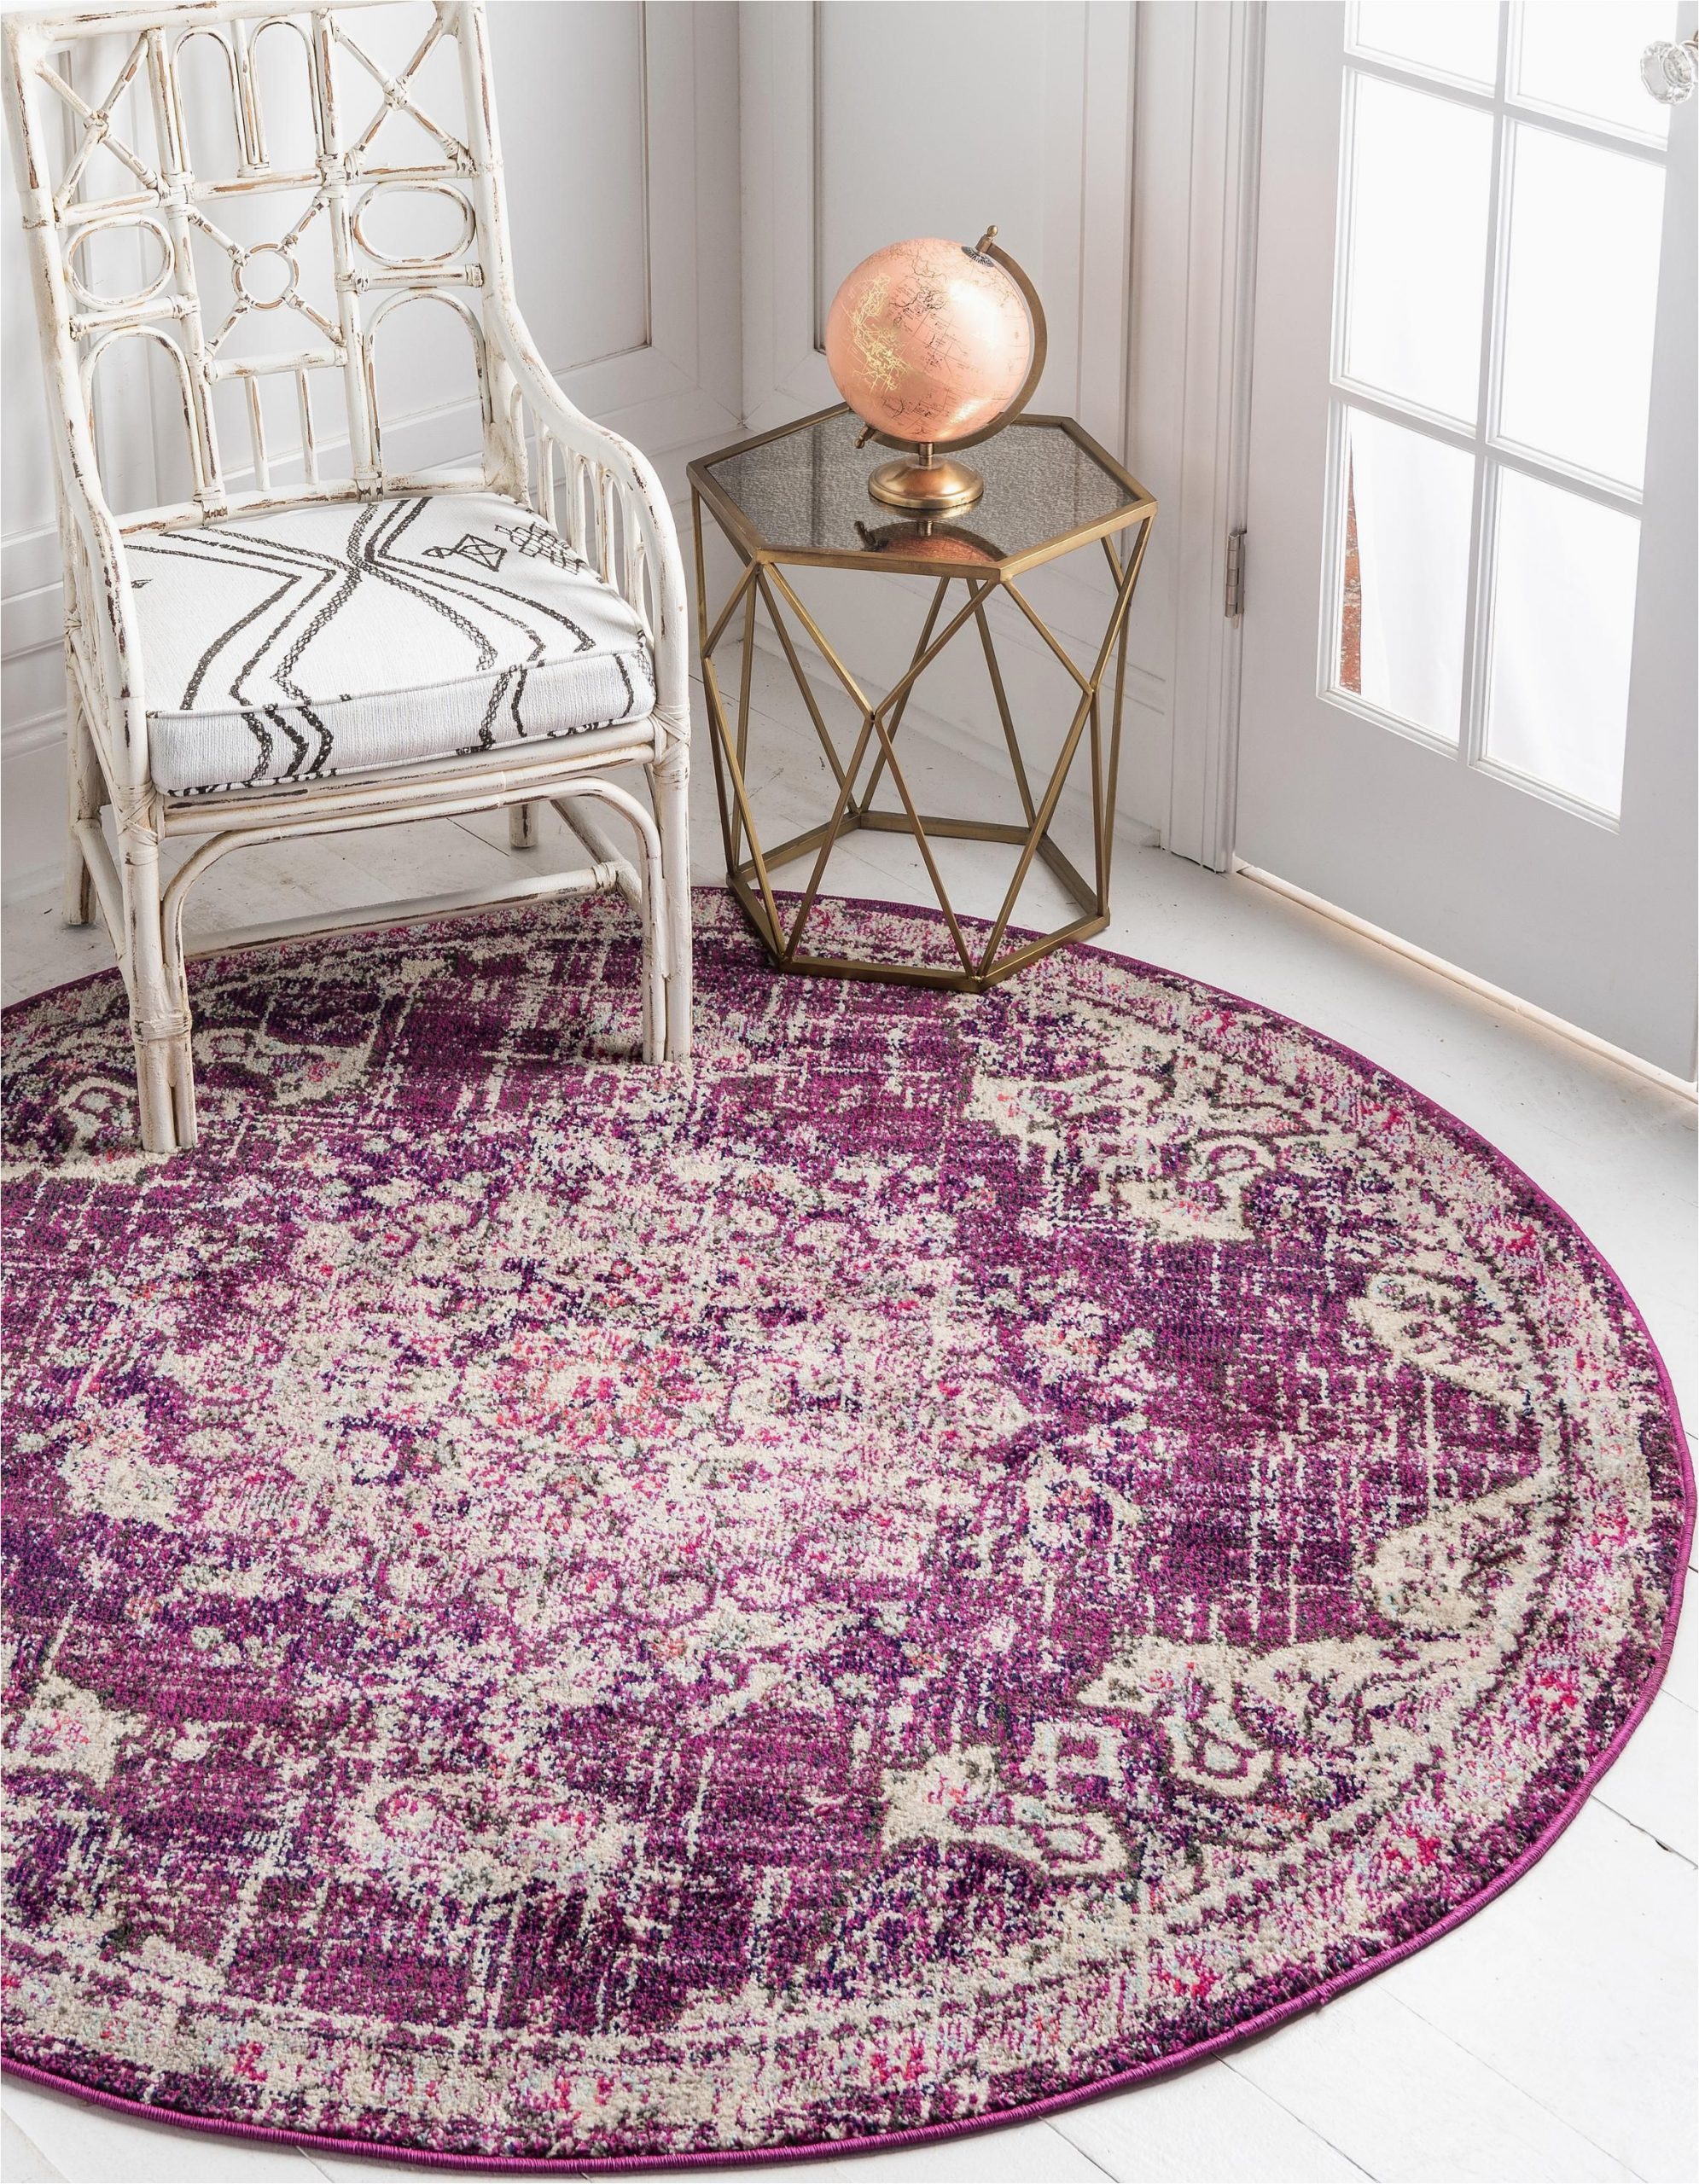 Bed Bath and Beyond Round Rugs Purple 6 X 6 Carrington Round Rug area Rugs Esalerugs